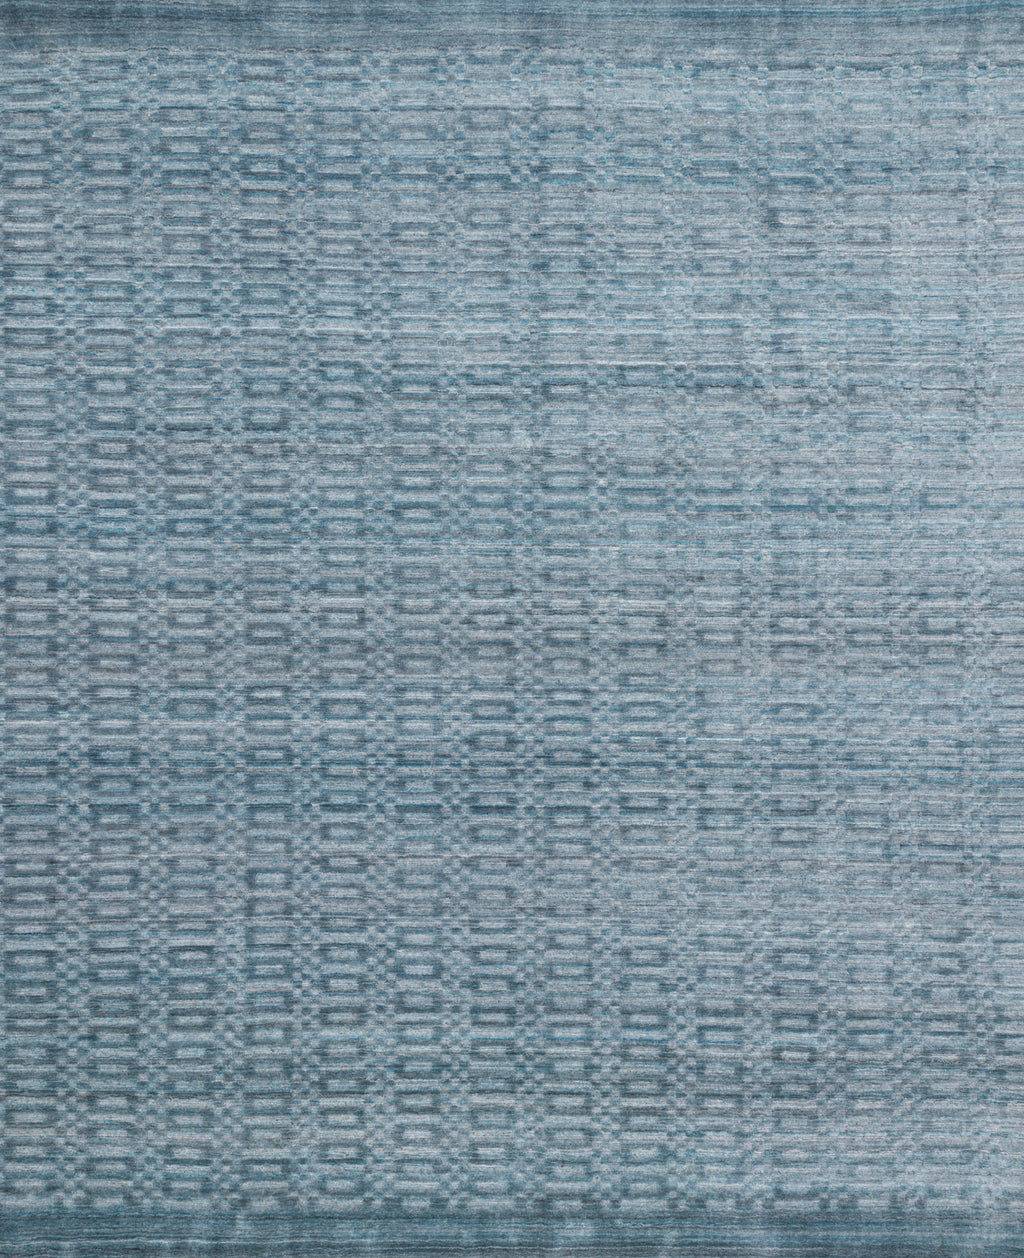 LENNON Collection Wool/Viscose Rug  in  OCEAN Blue Accent Hand-Loomed Wool/Viscose